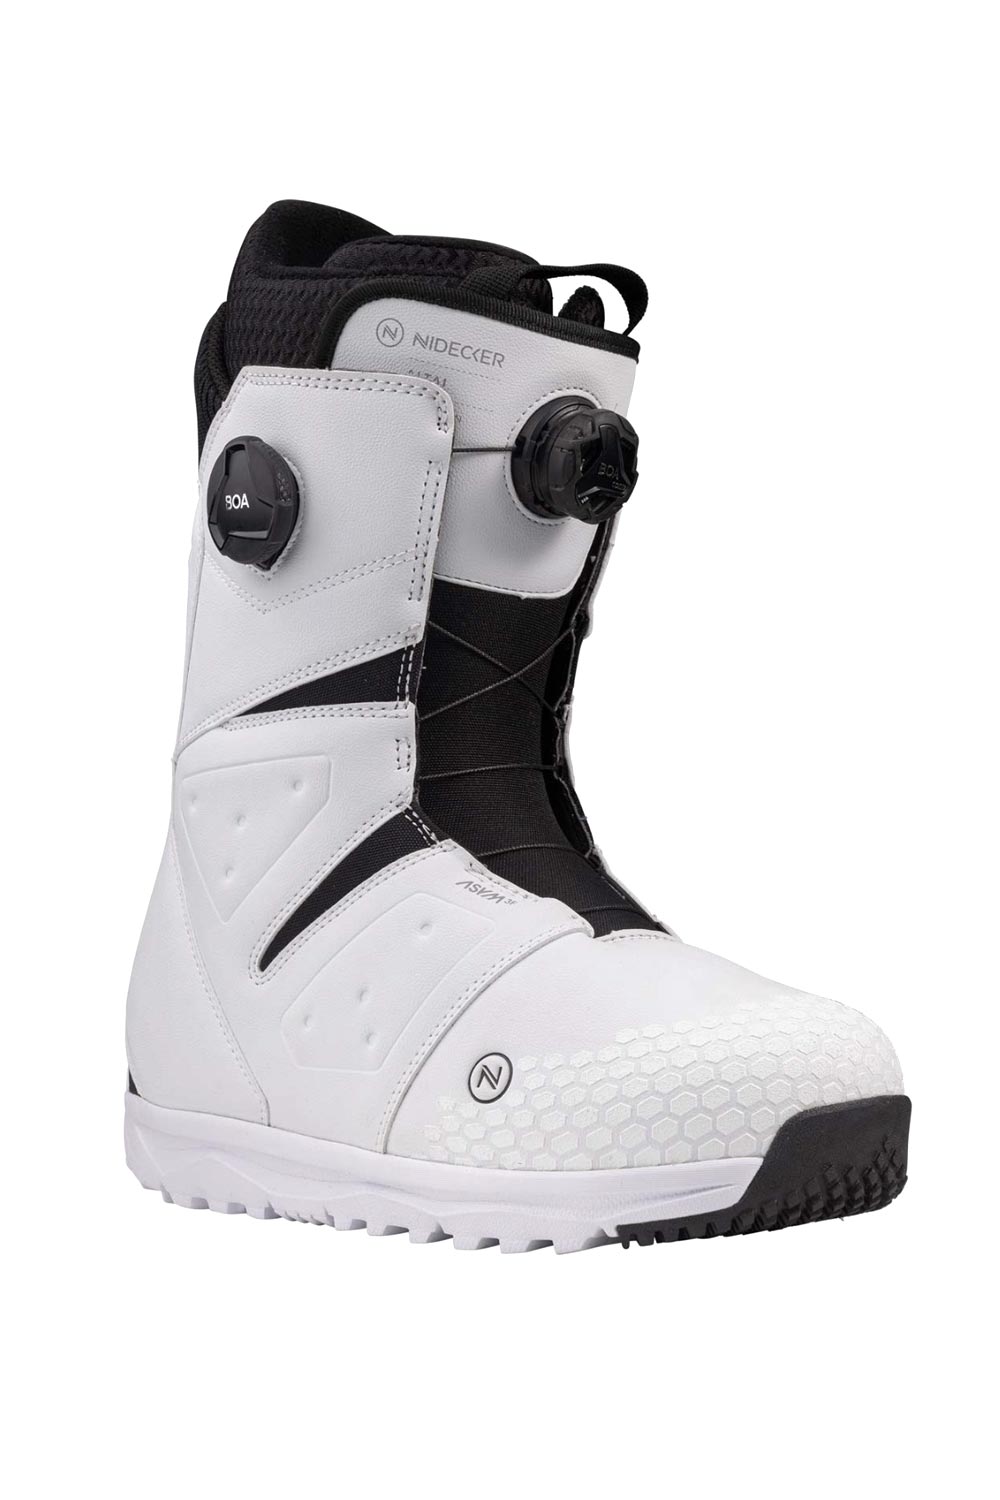 men's Nidecker Altai snowboard boots, white with black accents